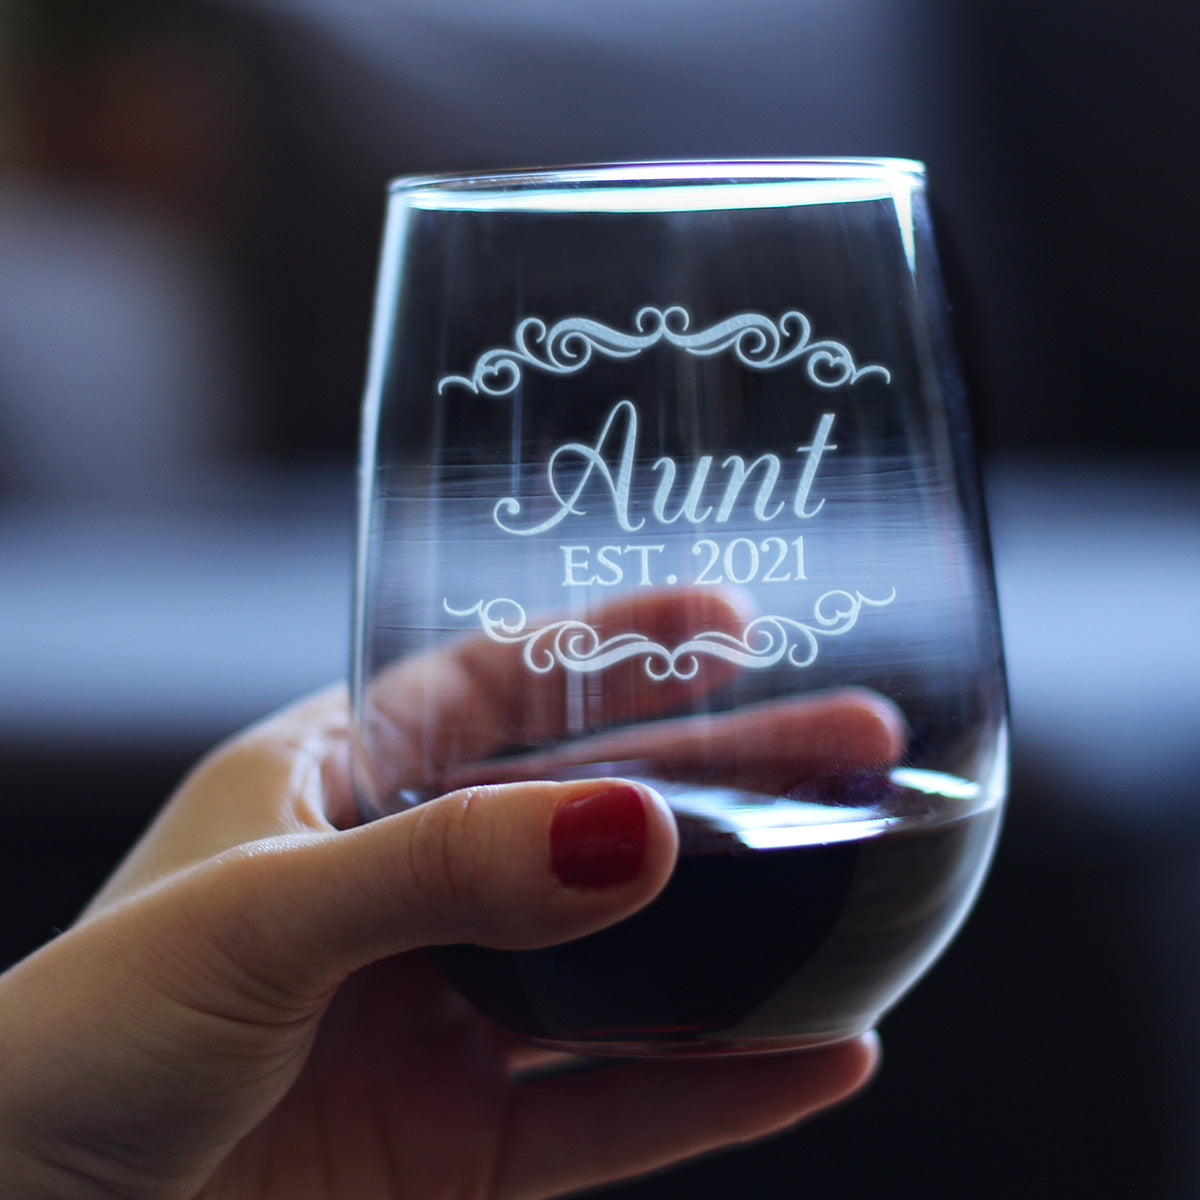 Aunt Est 2021 - New Aunties Stemless Wine Glass Gift for First Time Aunts - Decorative 17 Oz Large Glasses